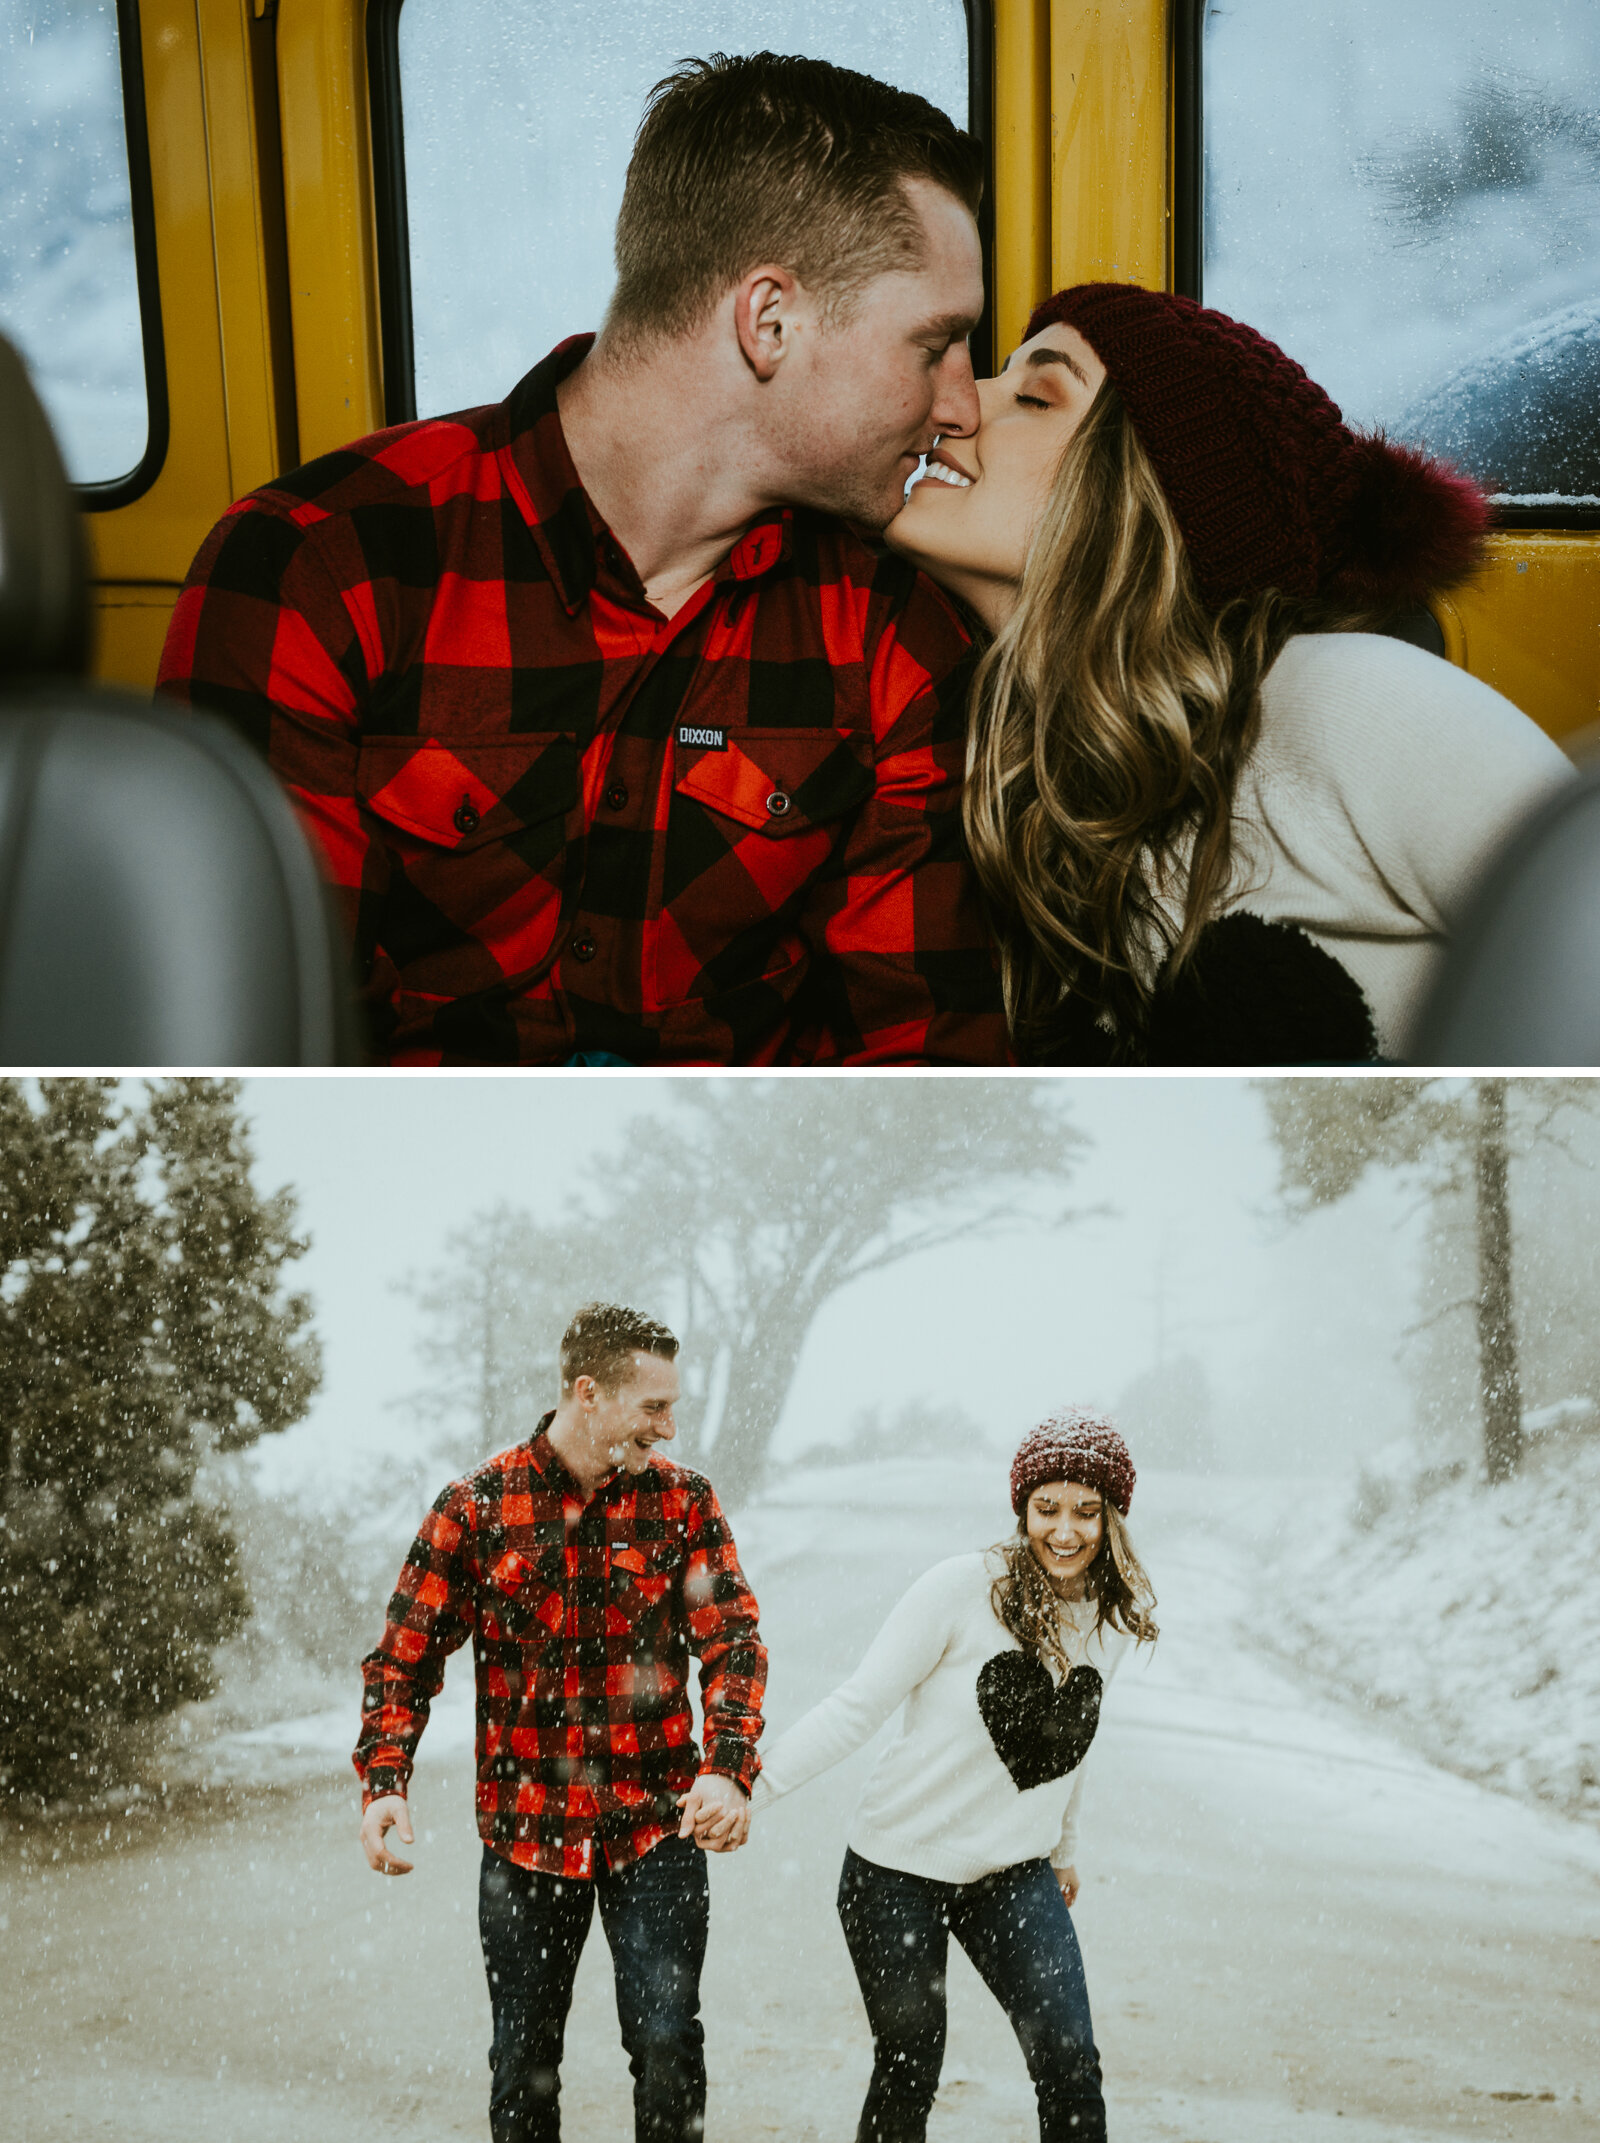 prescott arizona thumb butte engagement photos winter outfit inspiration couple session clothing ideas in the snow.jpg